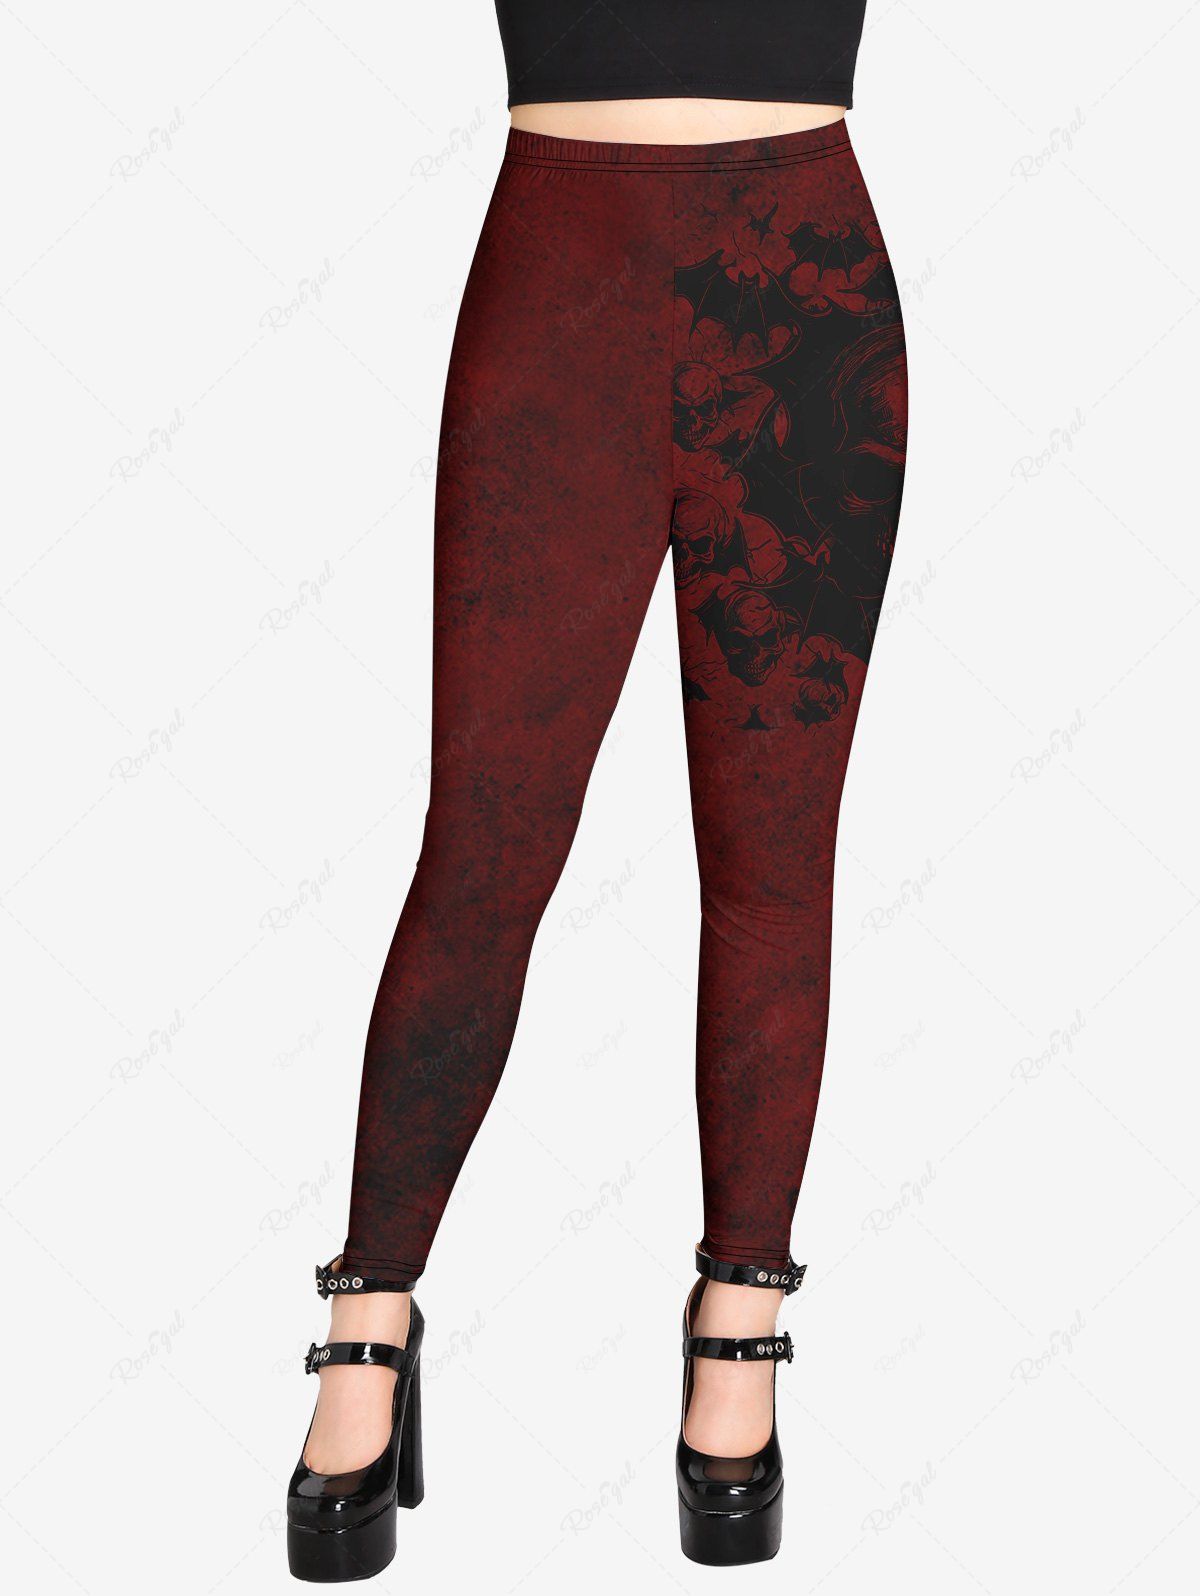 Ombre Floral Printed Leggings